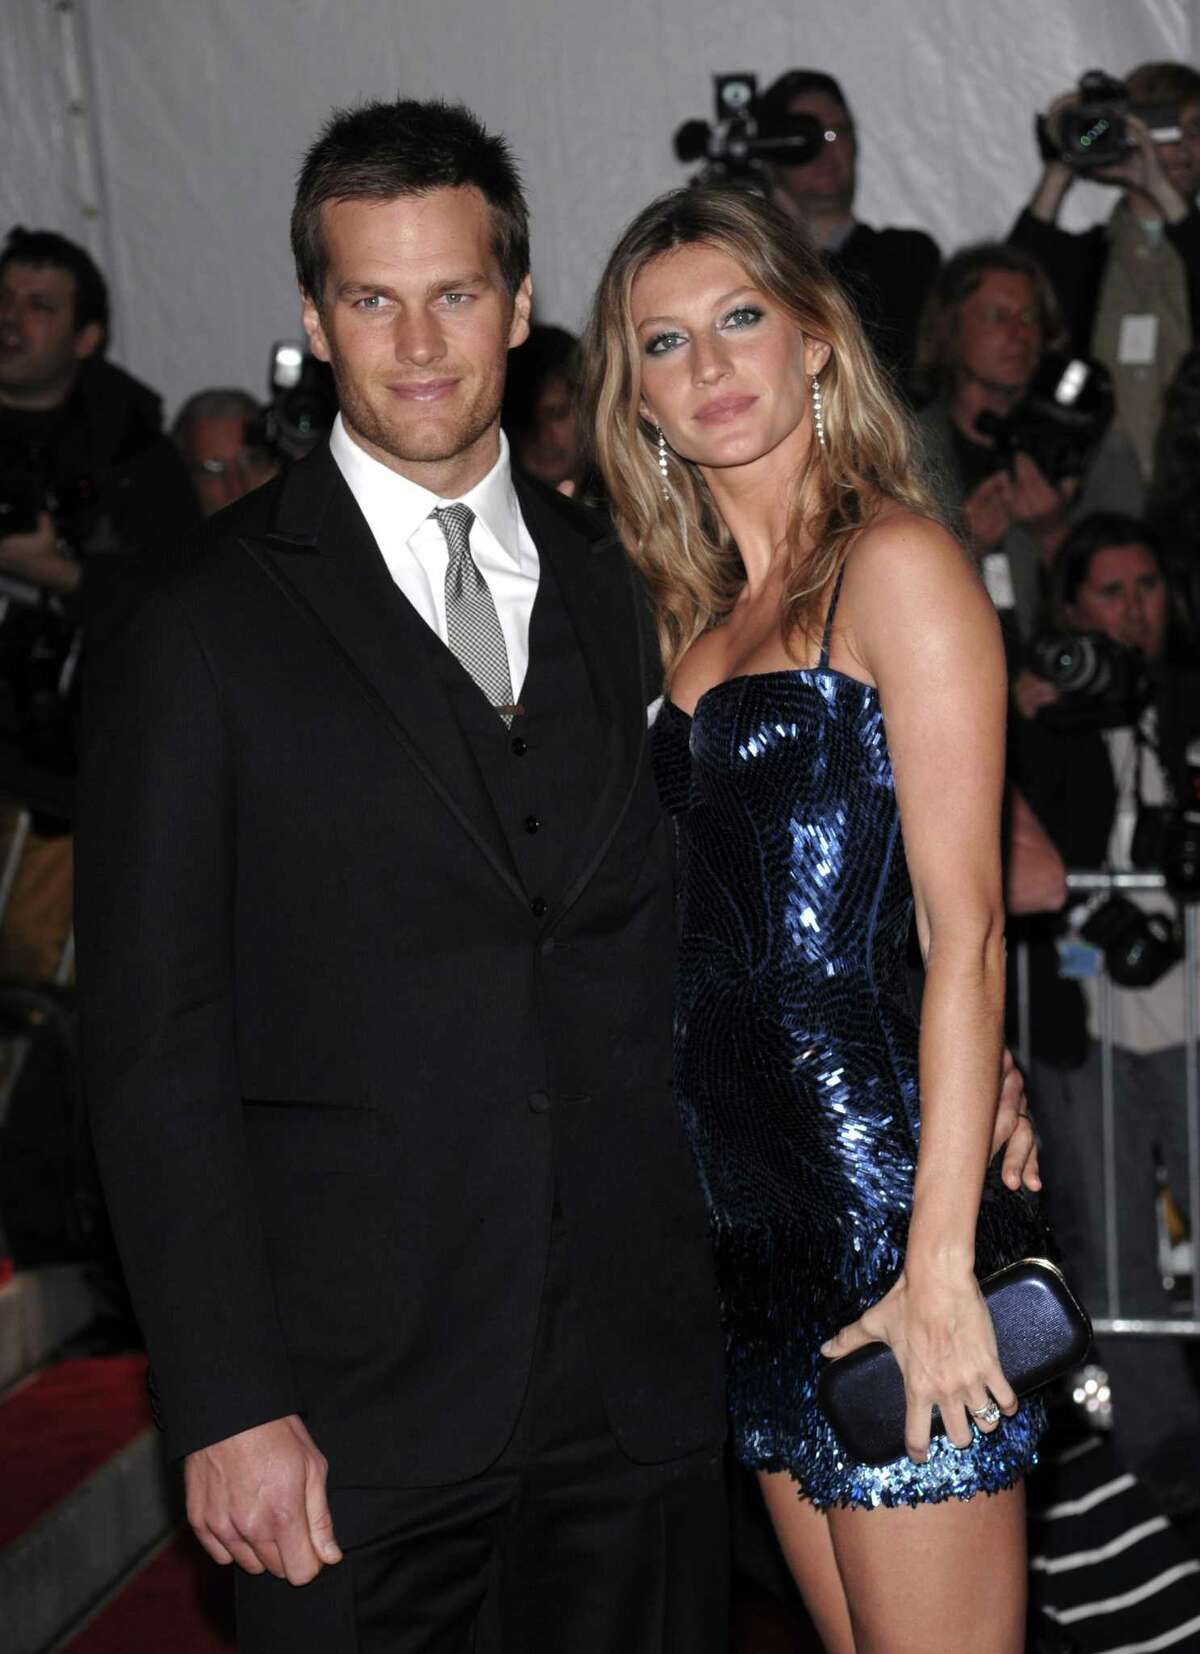 Tom Brady and Gisele Bundchen could be eyeing Greenwich for another addition to their real estate portfolio, the New York Post reports.